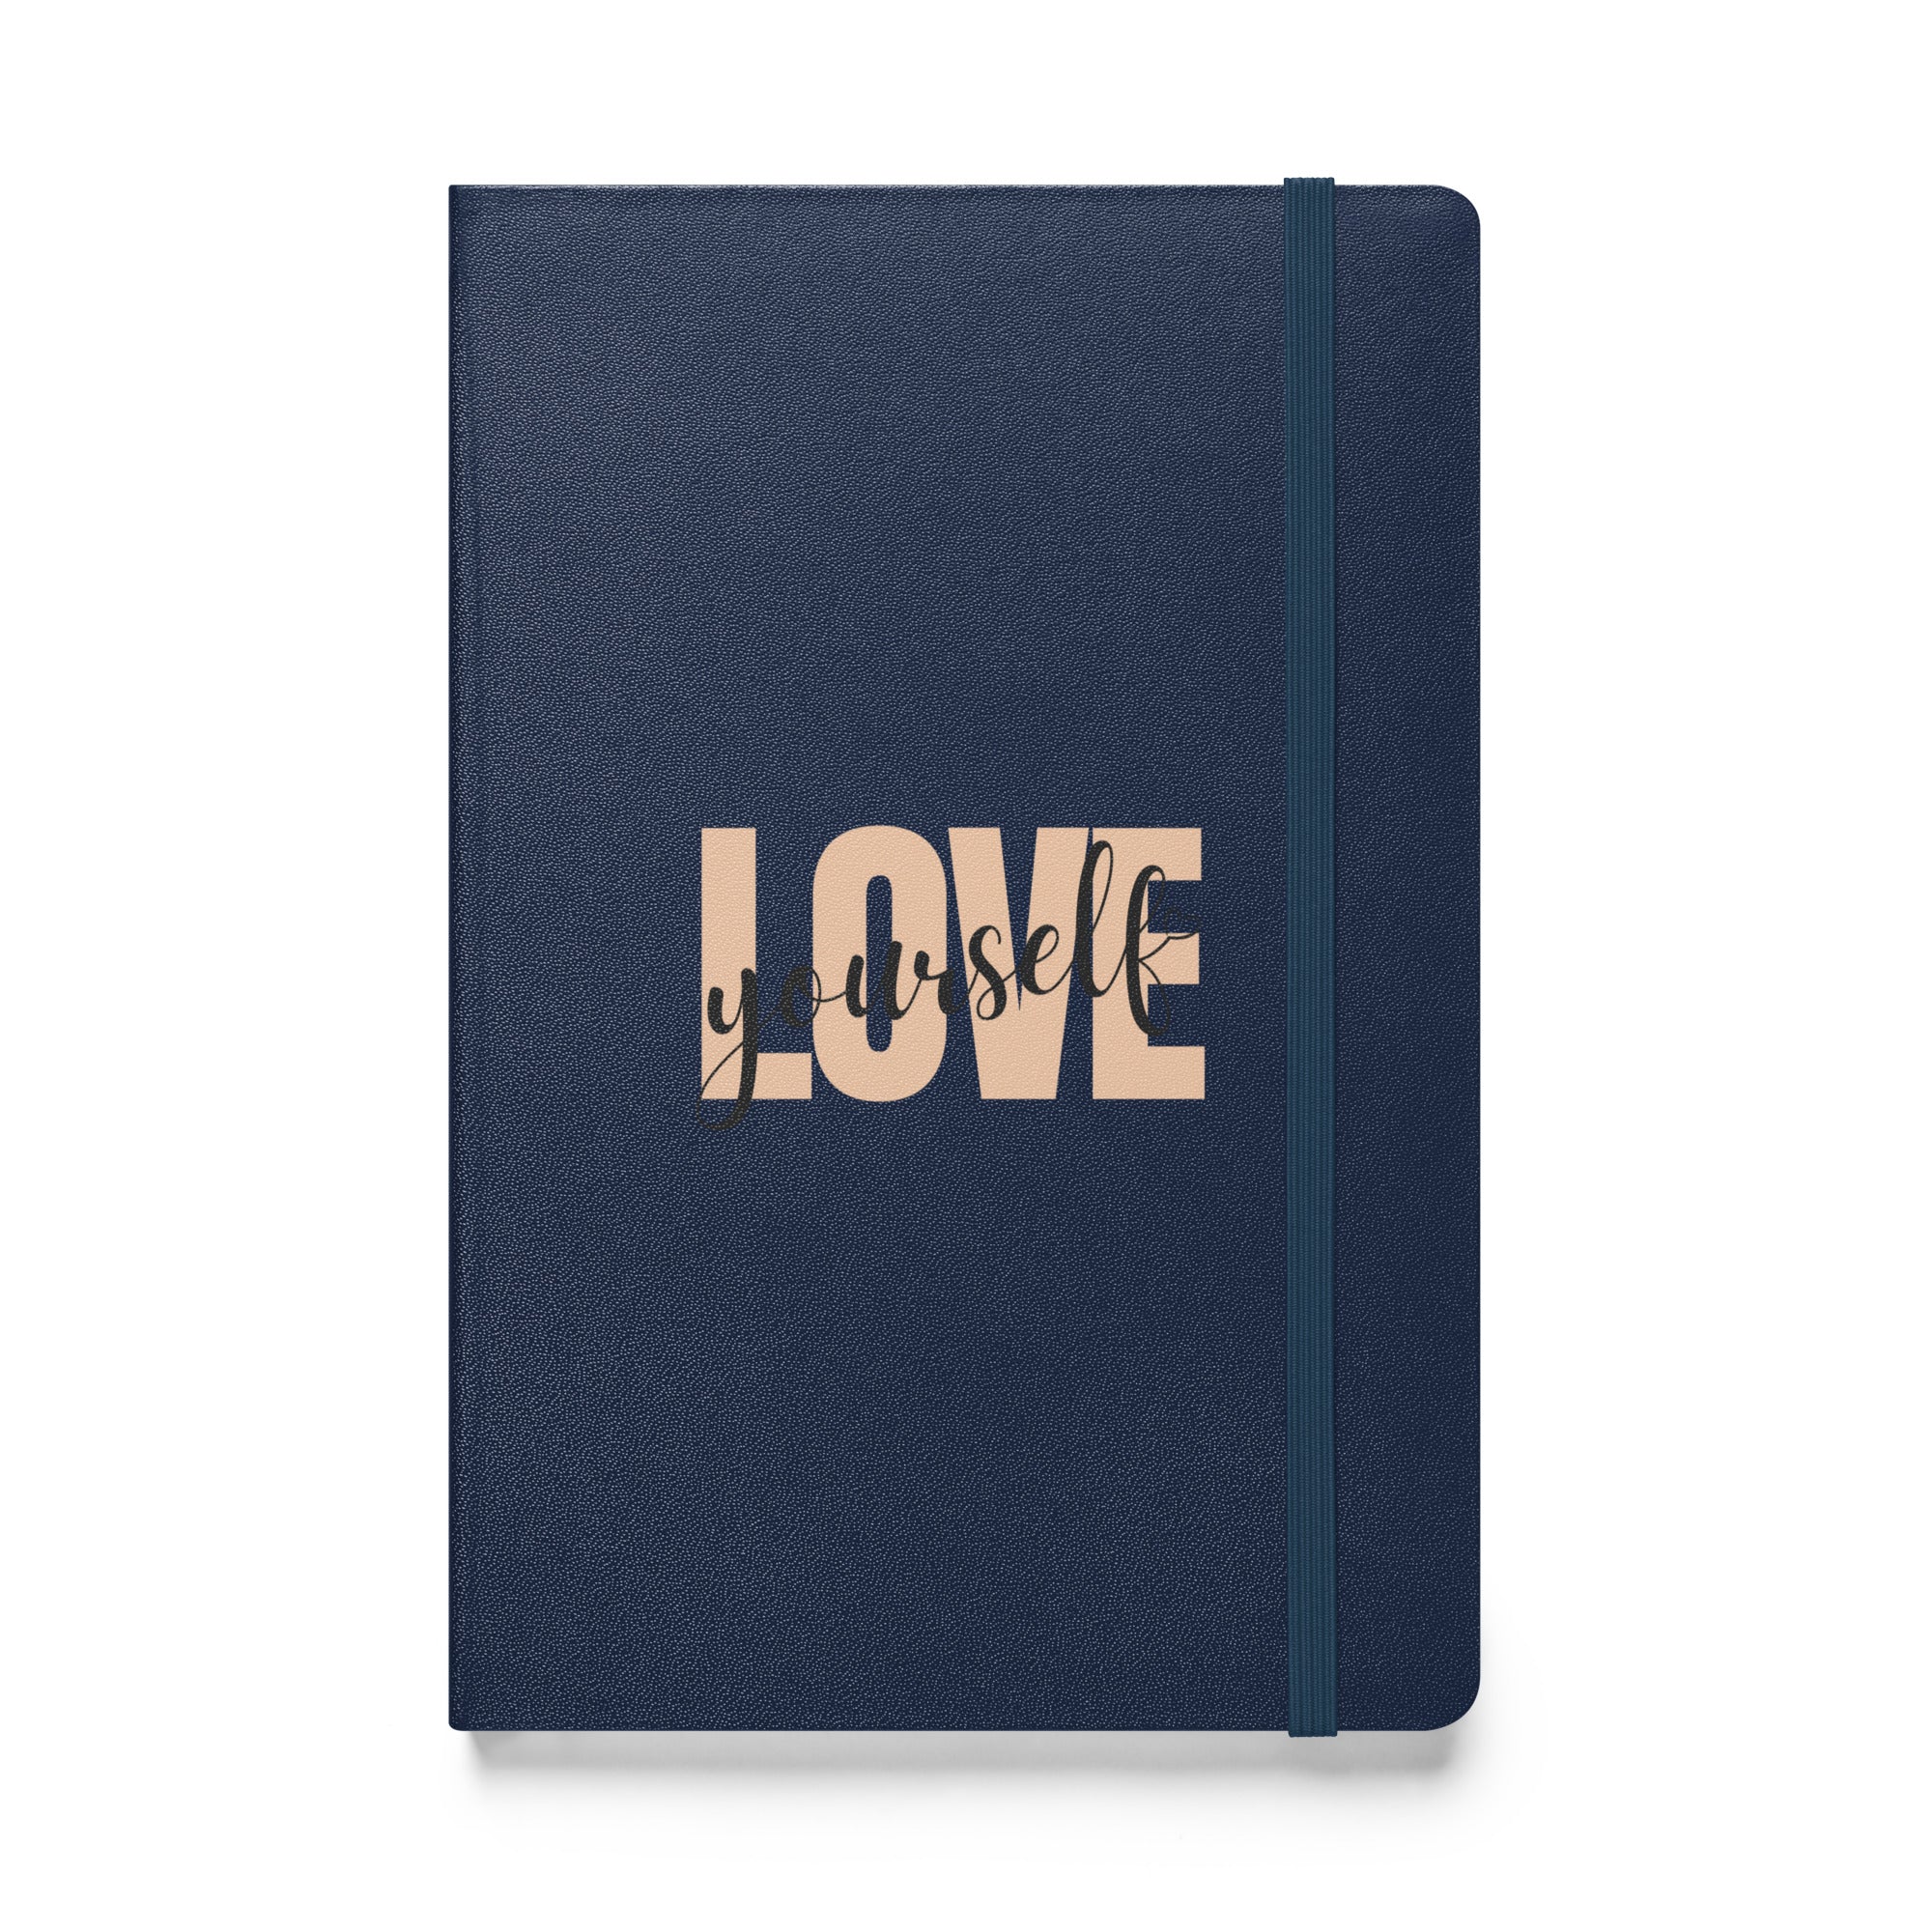 Love Yourself Hardcover bound notebook